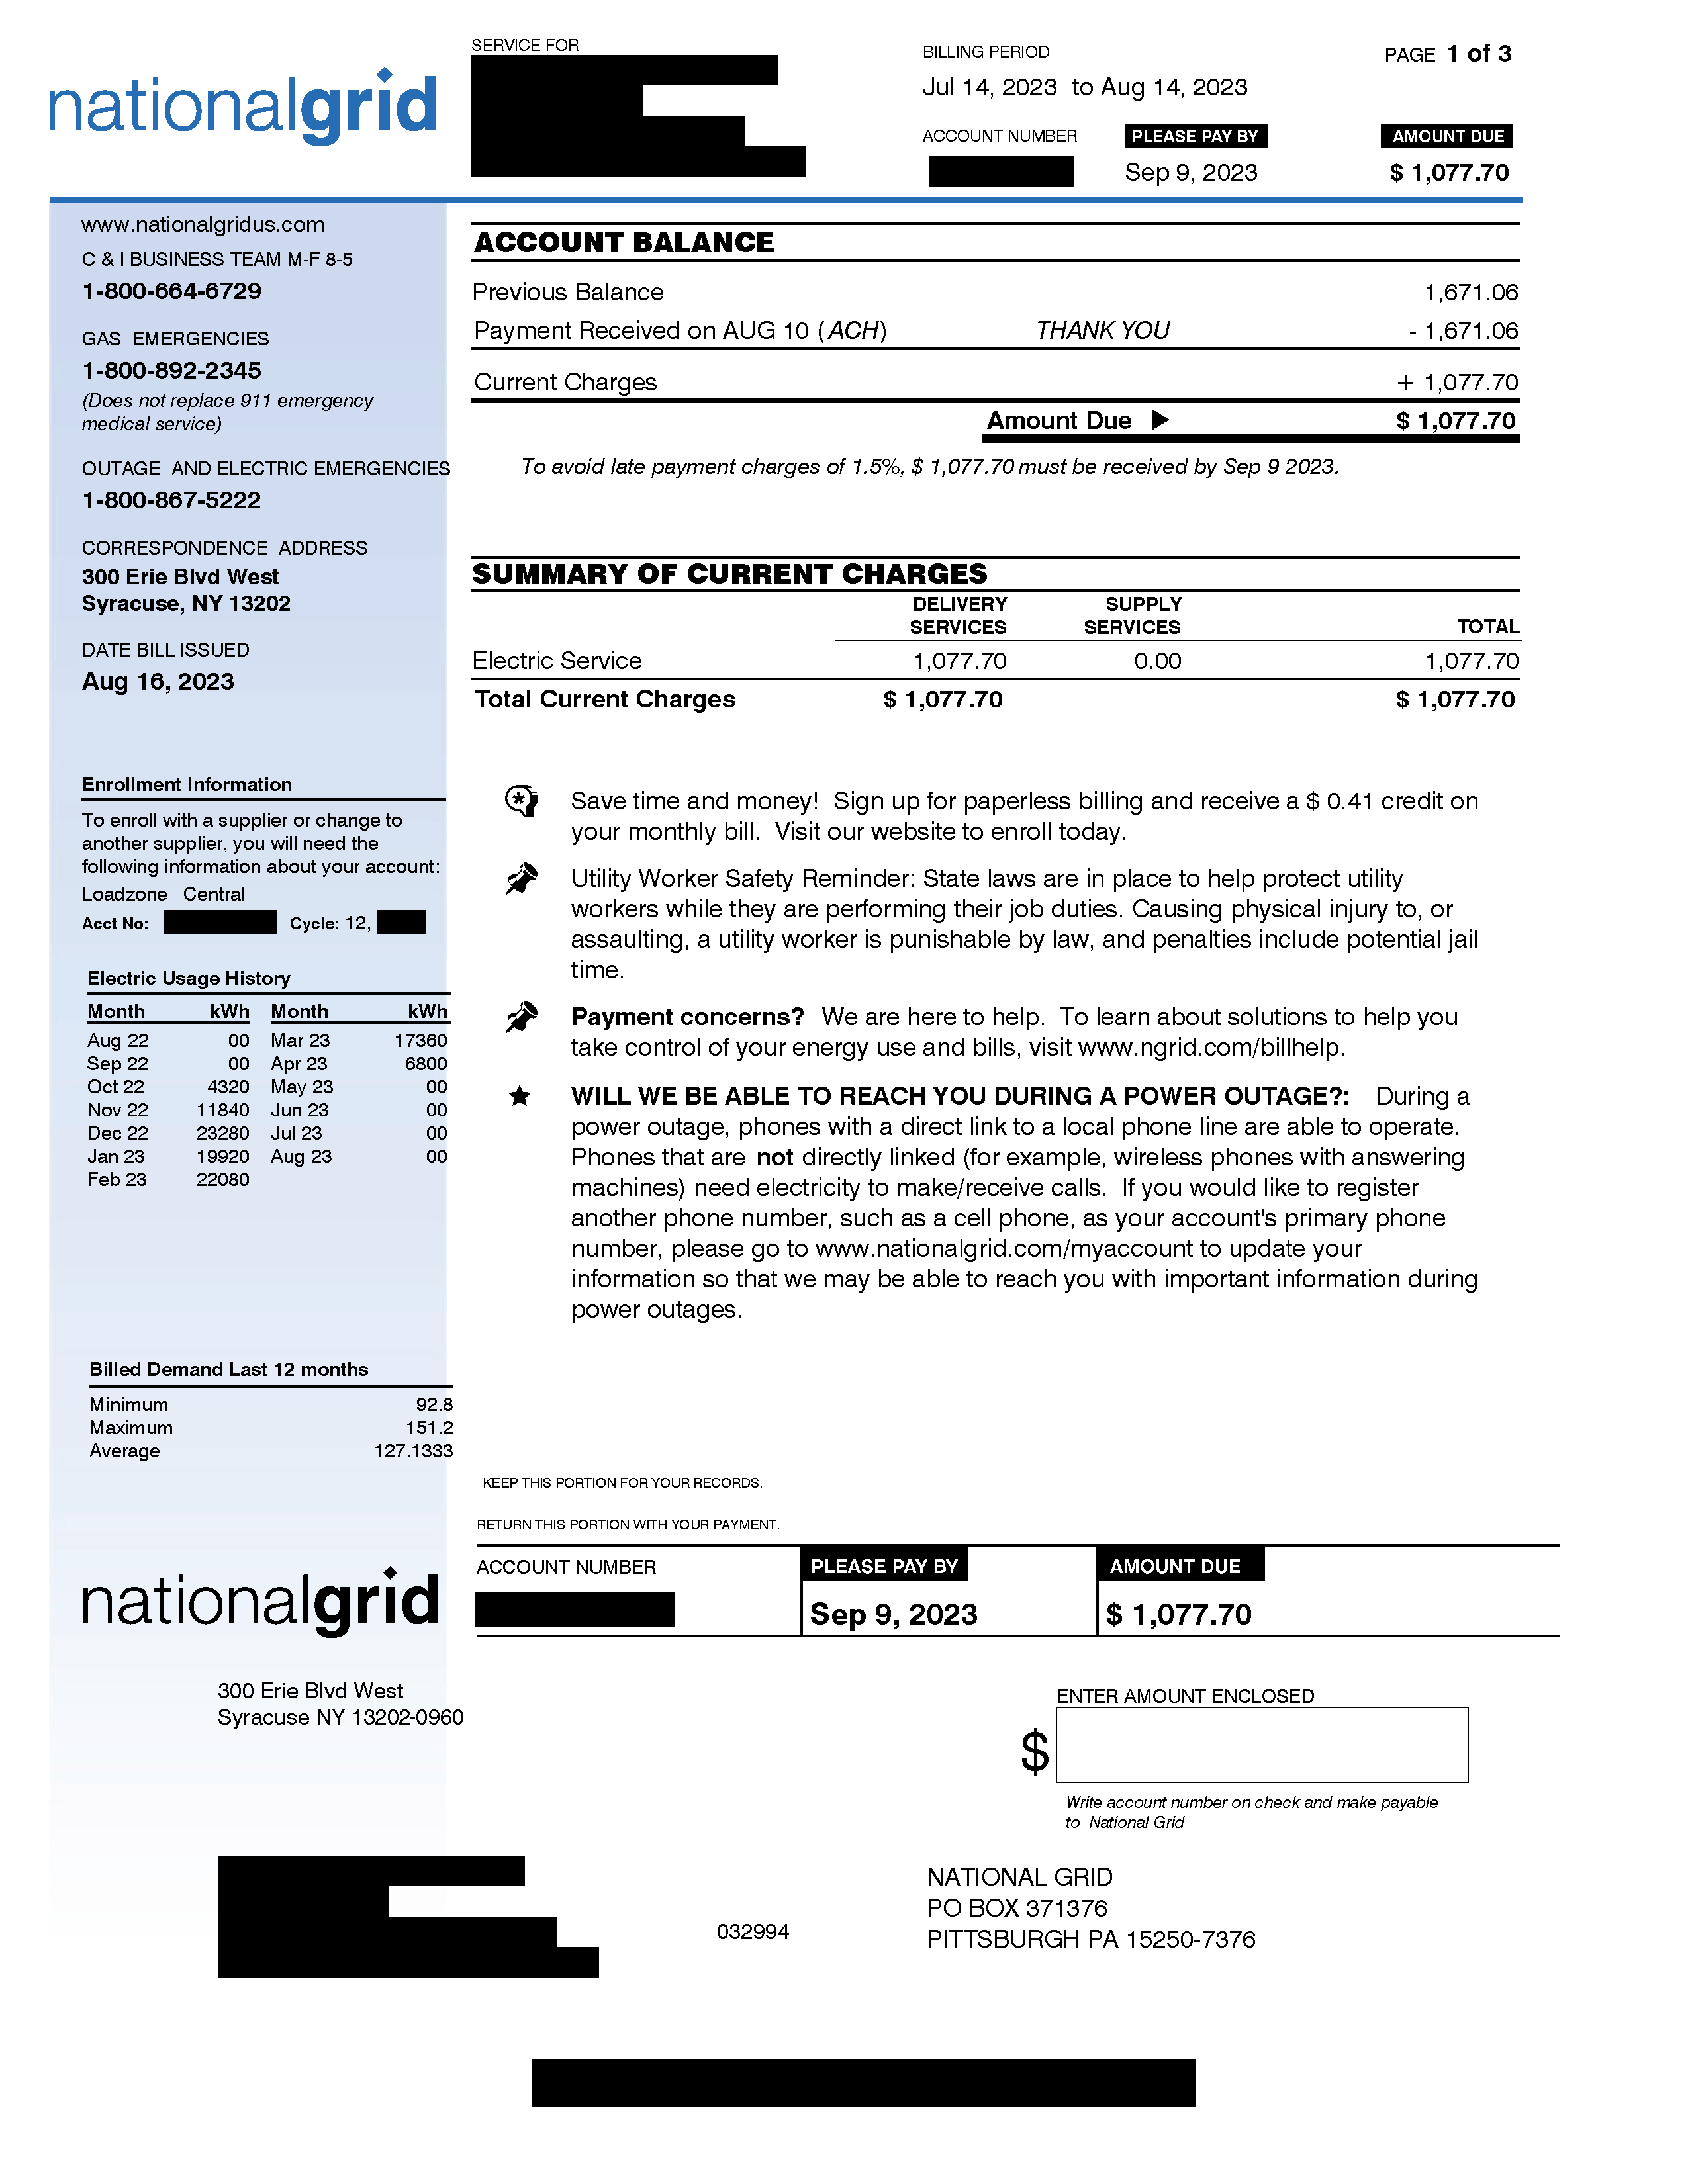 Rooftop Solar Bill - Page 1